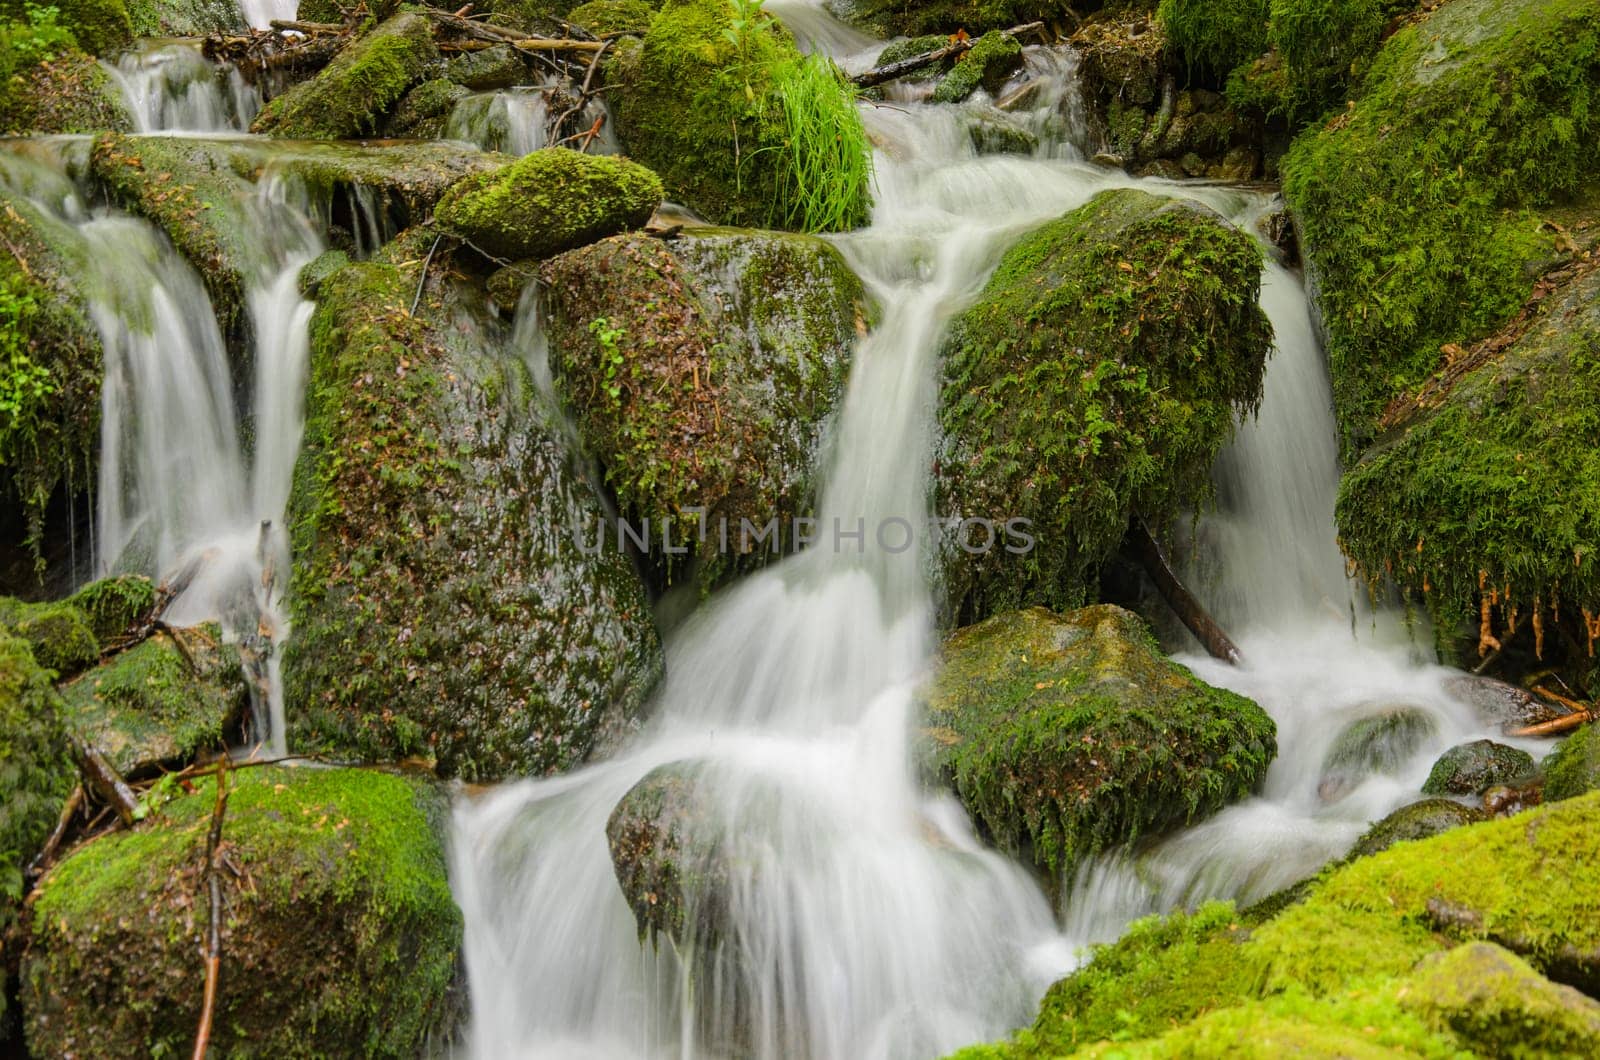 A small waterfall cascades over moss-covered rocks in a peaceful forest. Lush green trees surround the waterfall, creating a serene natural scene.